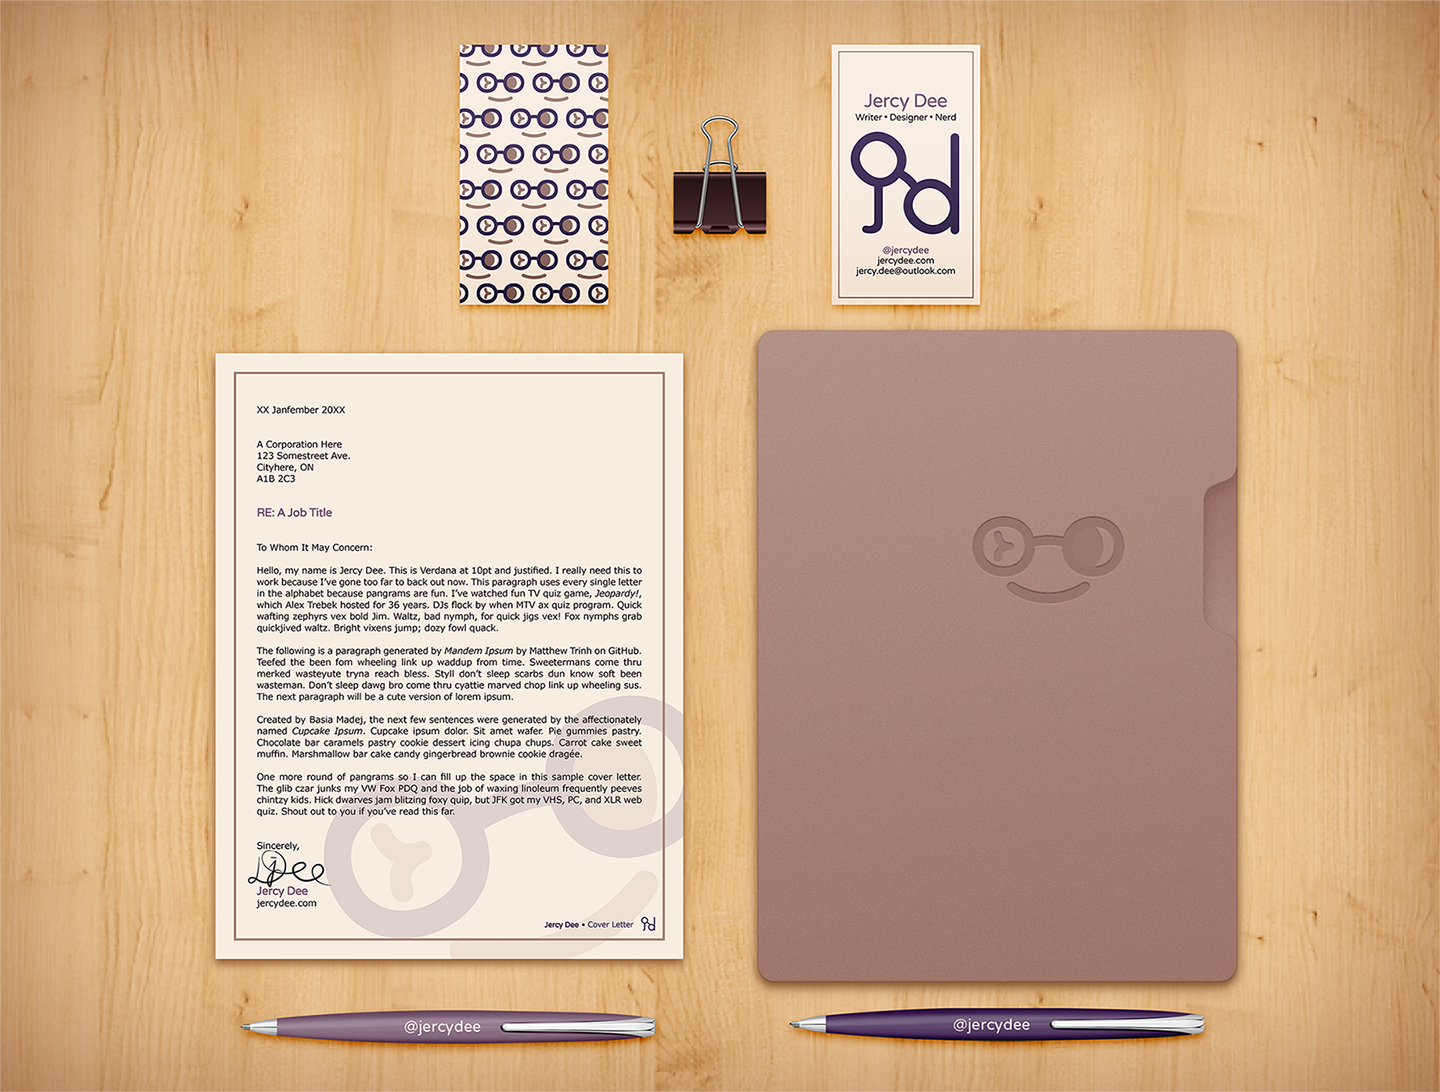 My brand applied onto different stationery/printed items (business cards, cover letter, folder, and pens) along with a dark purple bulldog clip against a wood background.